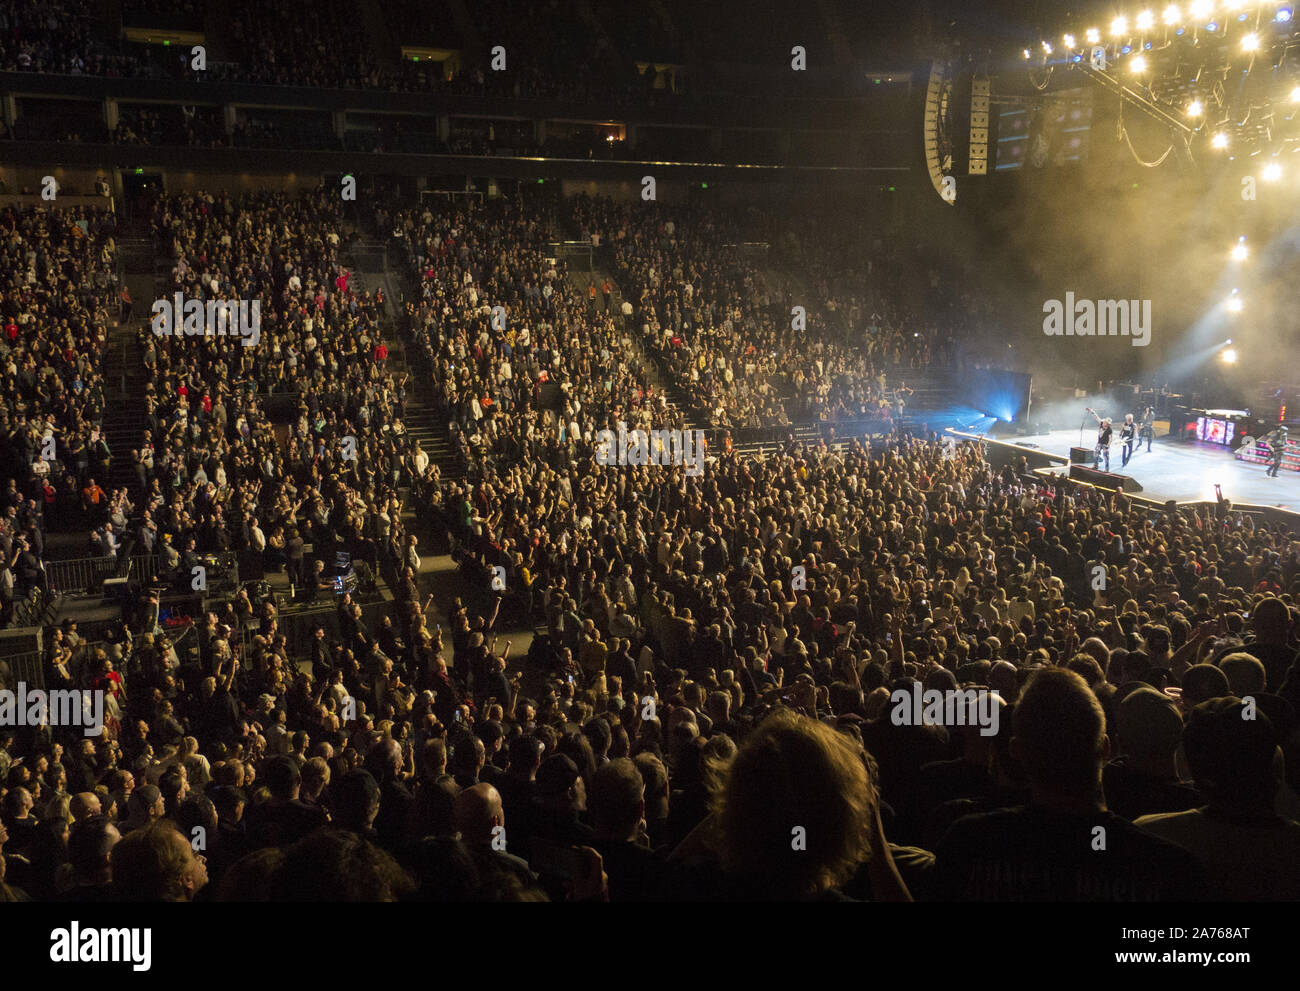 October 29, 2019, Salt Lake City, UT, USA: The rock band Guns N' Roses performs live onstage during a concert on their The Not in This Lifetime Tour at the Vivint Smart Home Arena. (Credit Image: © KC Alfred/ZUMA Wire) Stock Photo